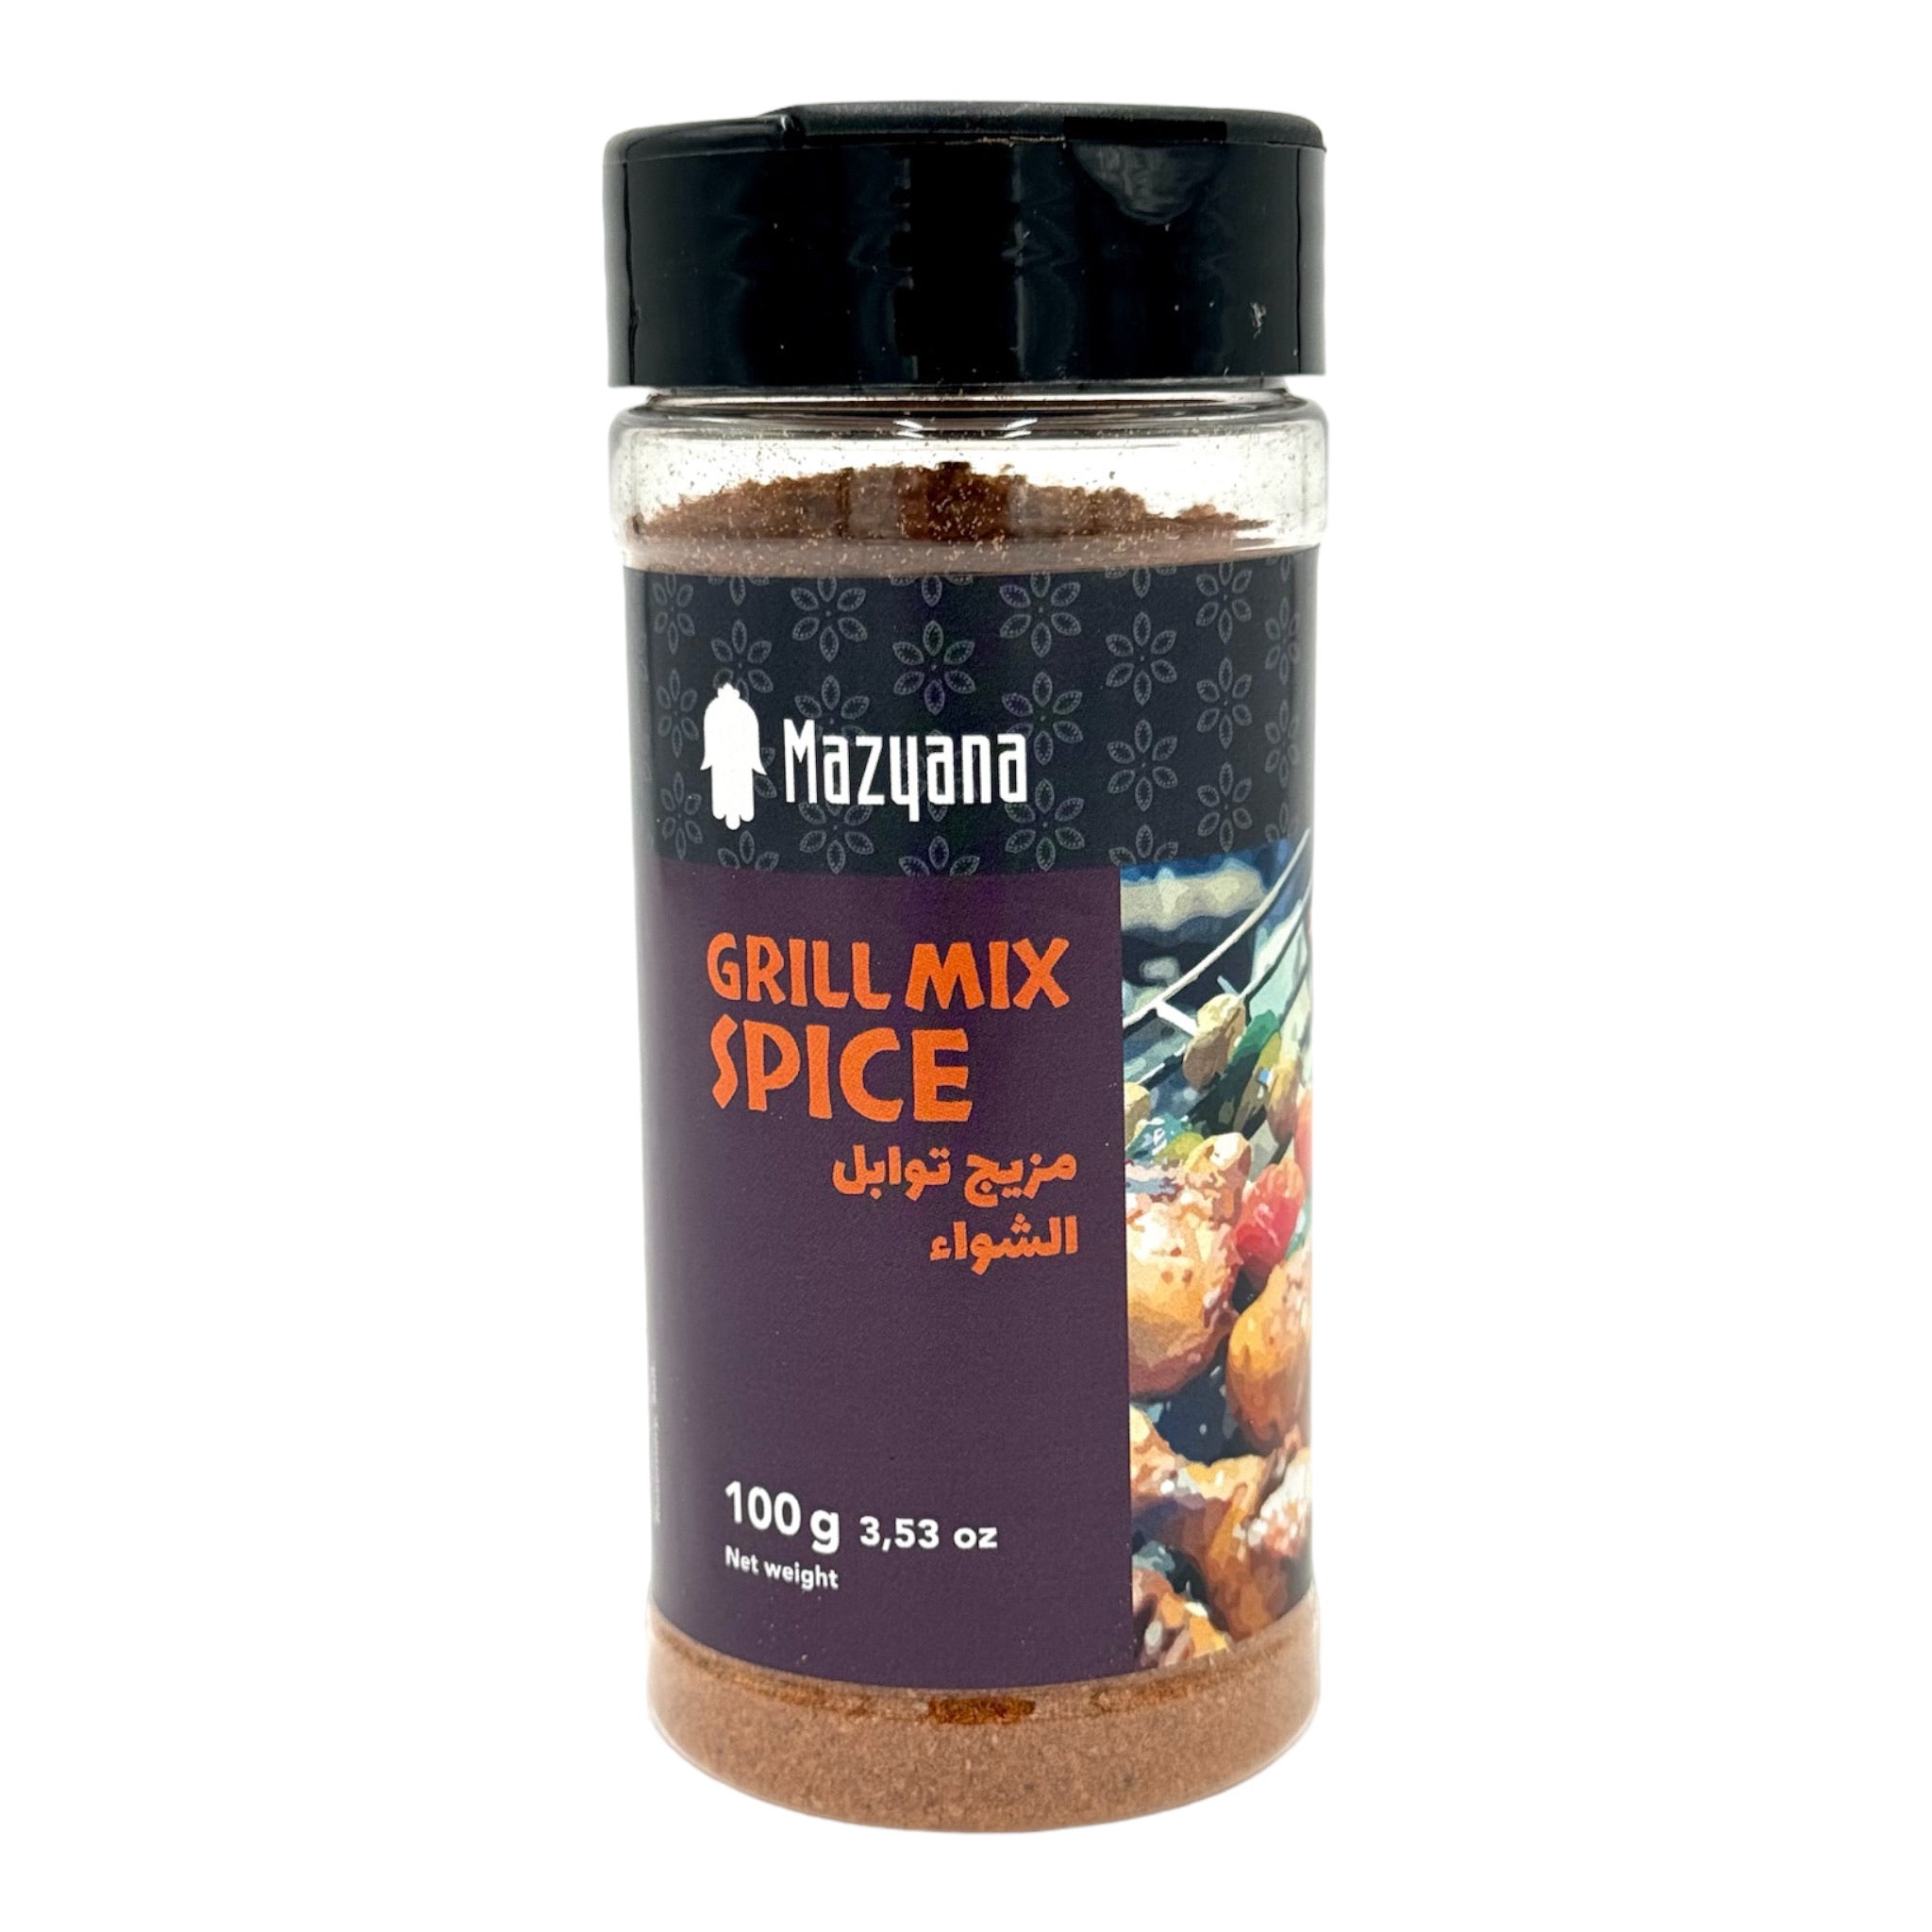 Moroccan Grill Spice Blend by Mazyana Brand